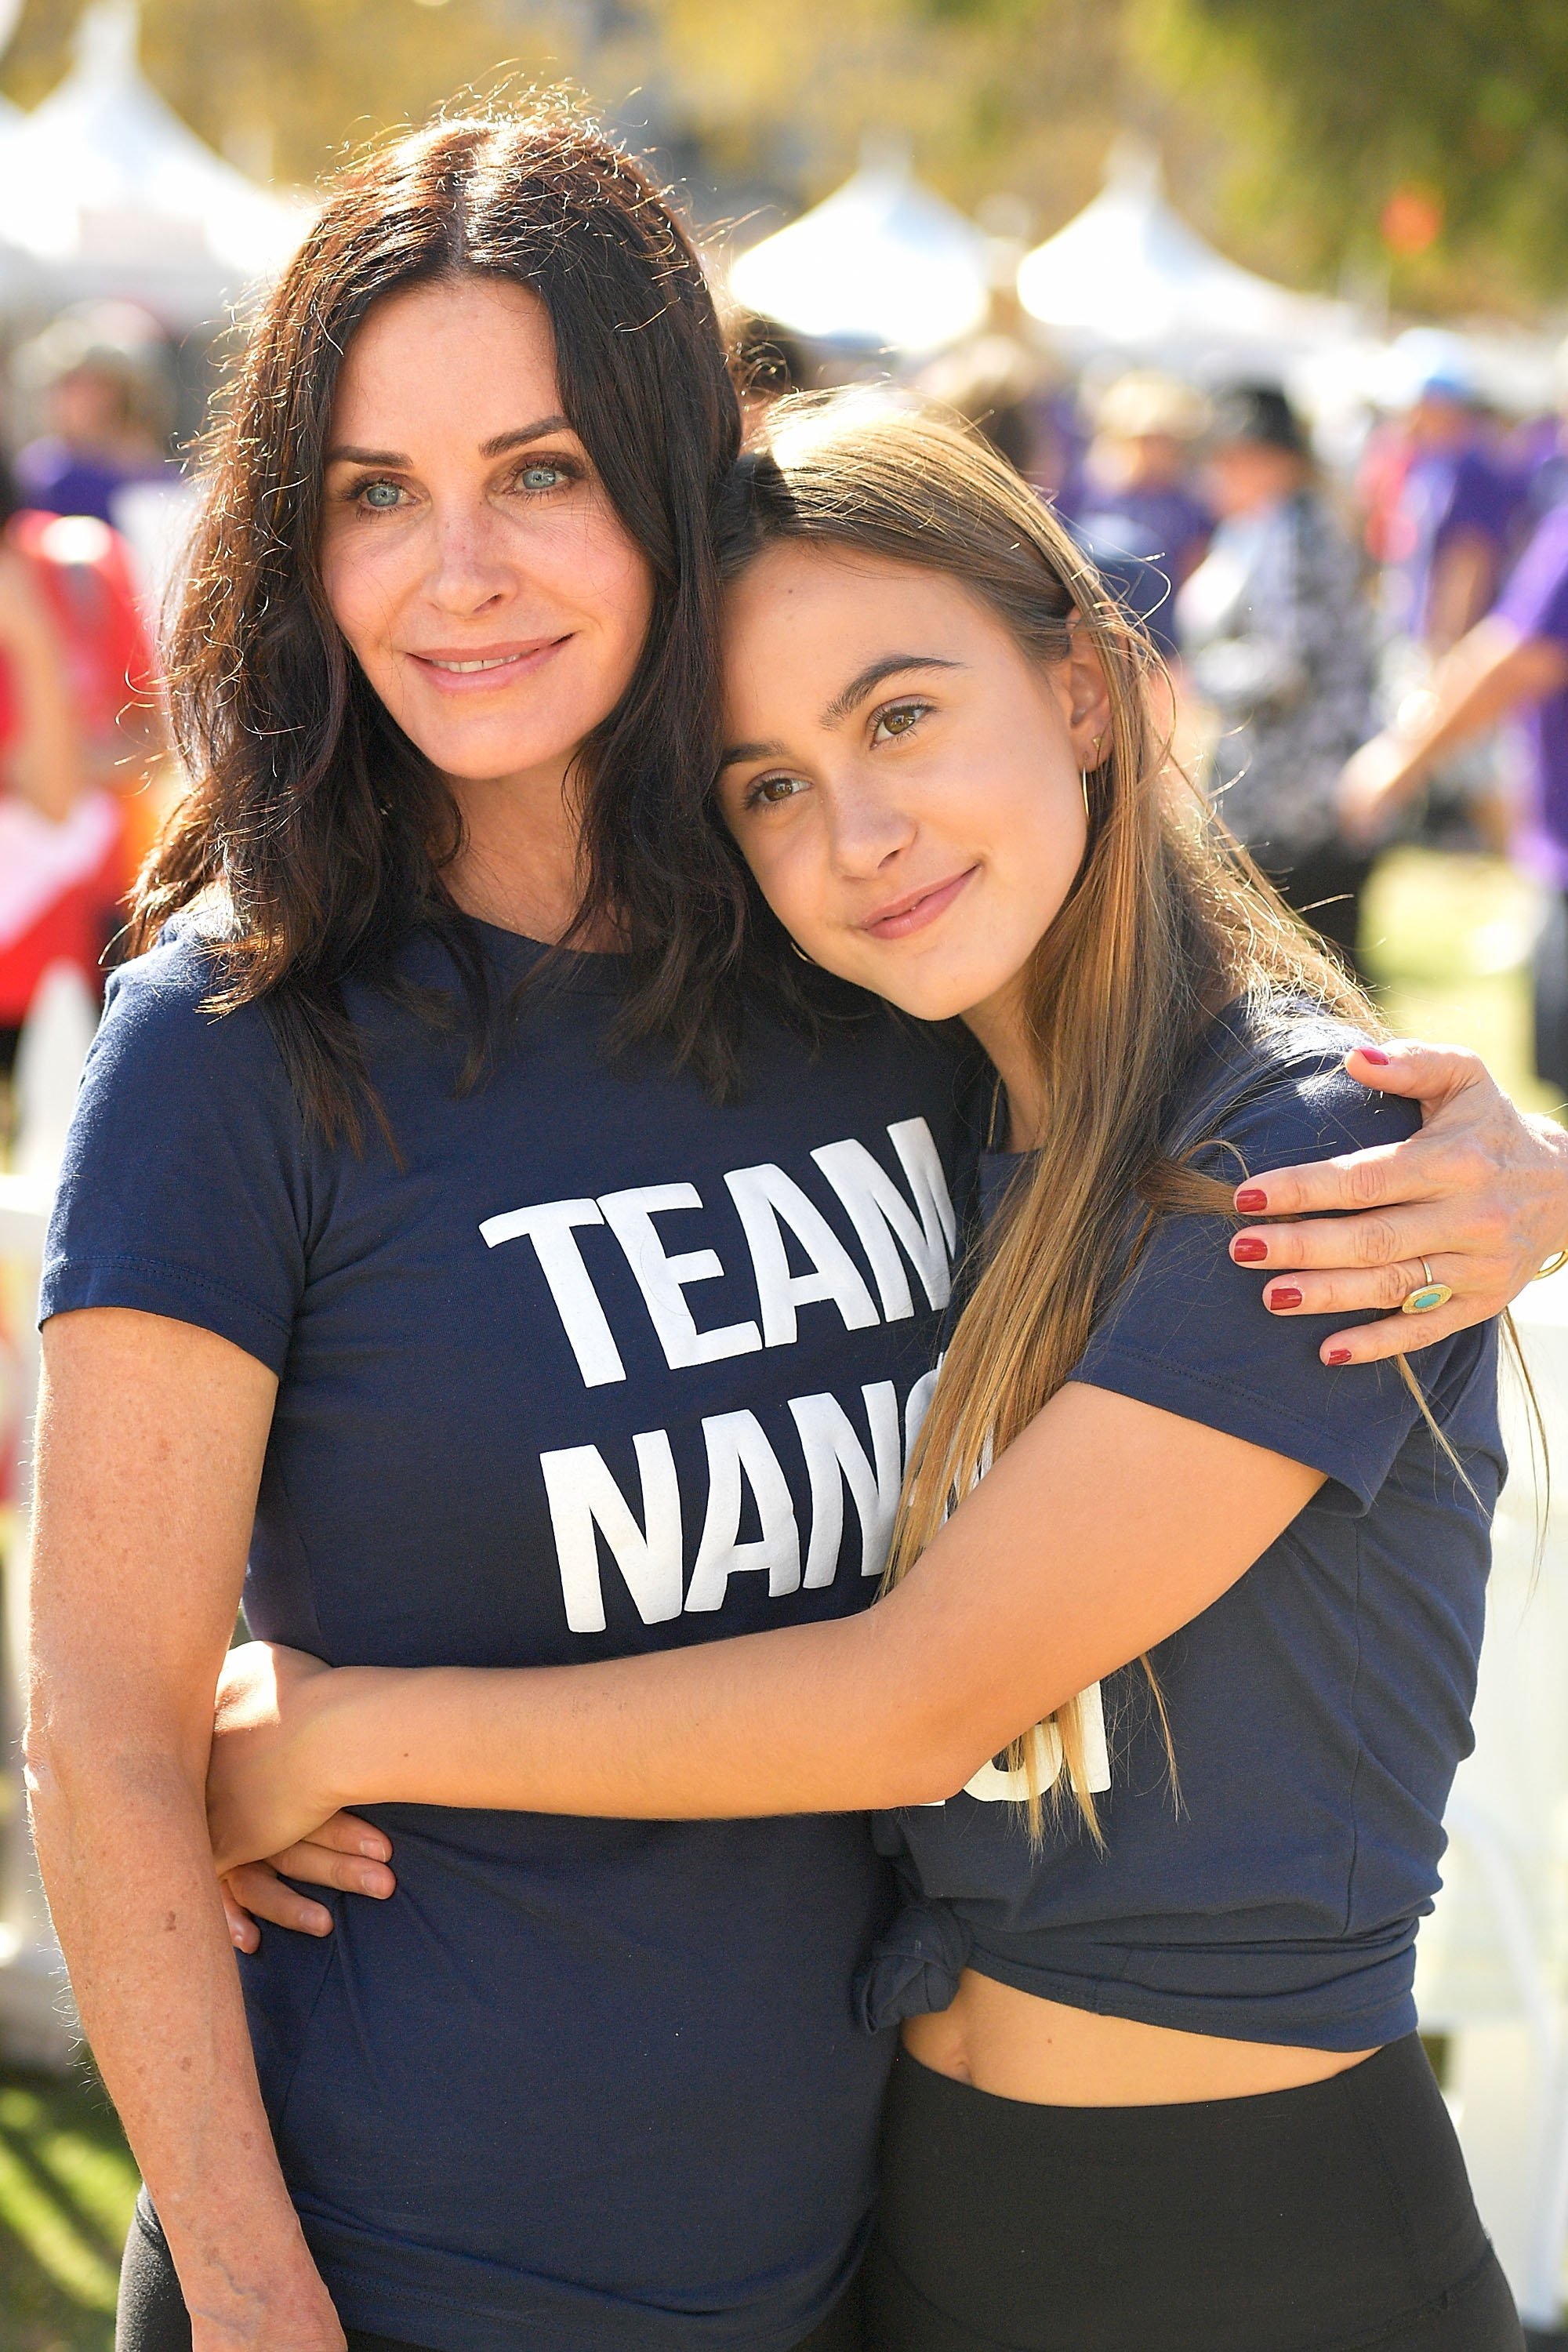 Courteney Cox and Coco Arquette attend the Nanci Ryder's "Team Nanci" participates in the 15th Annual LA County Walk to Defeat ALS at Exposition Park on October 15, 2017, in Los Angeles, California. | Source: Getty Images.